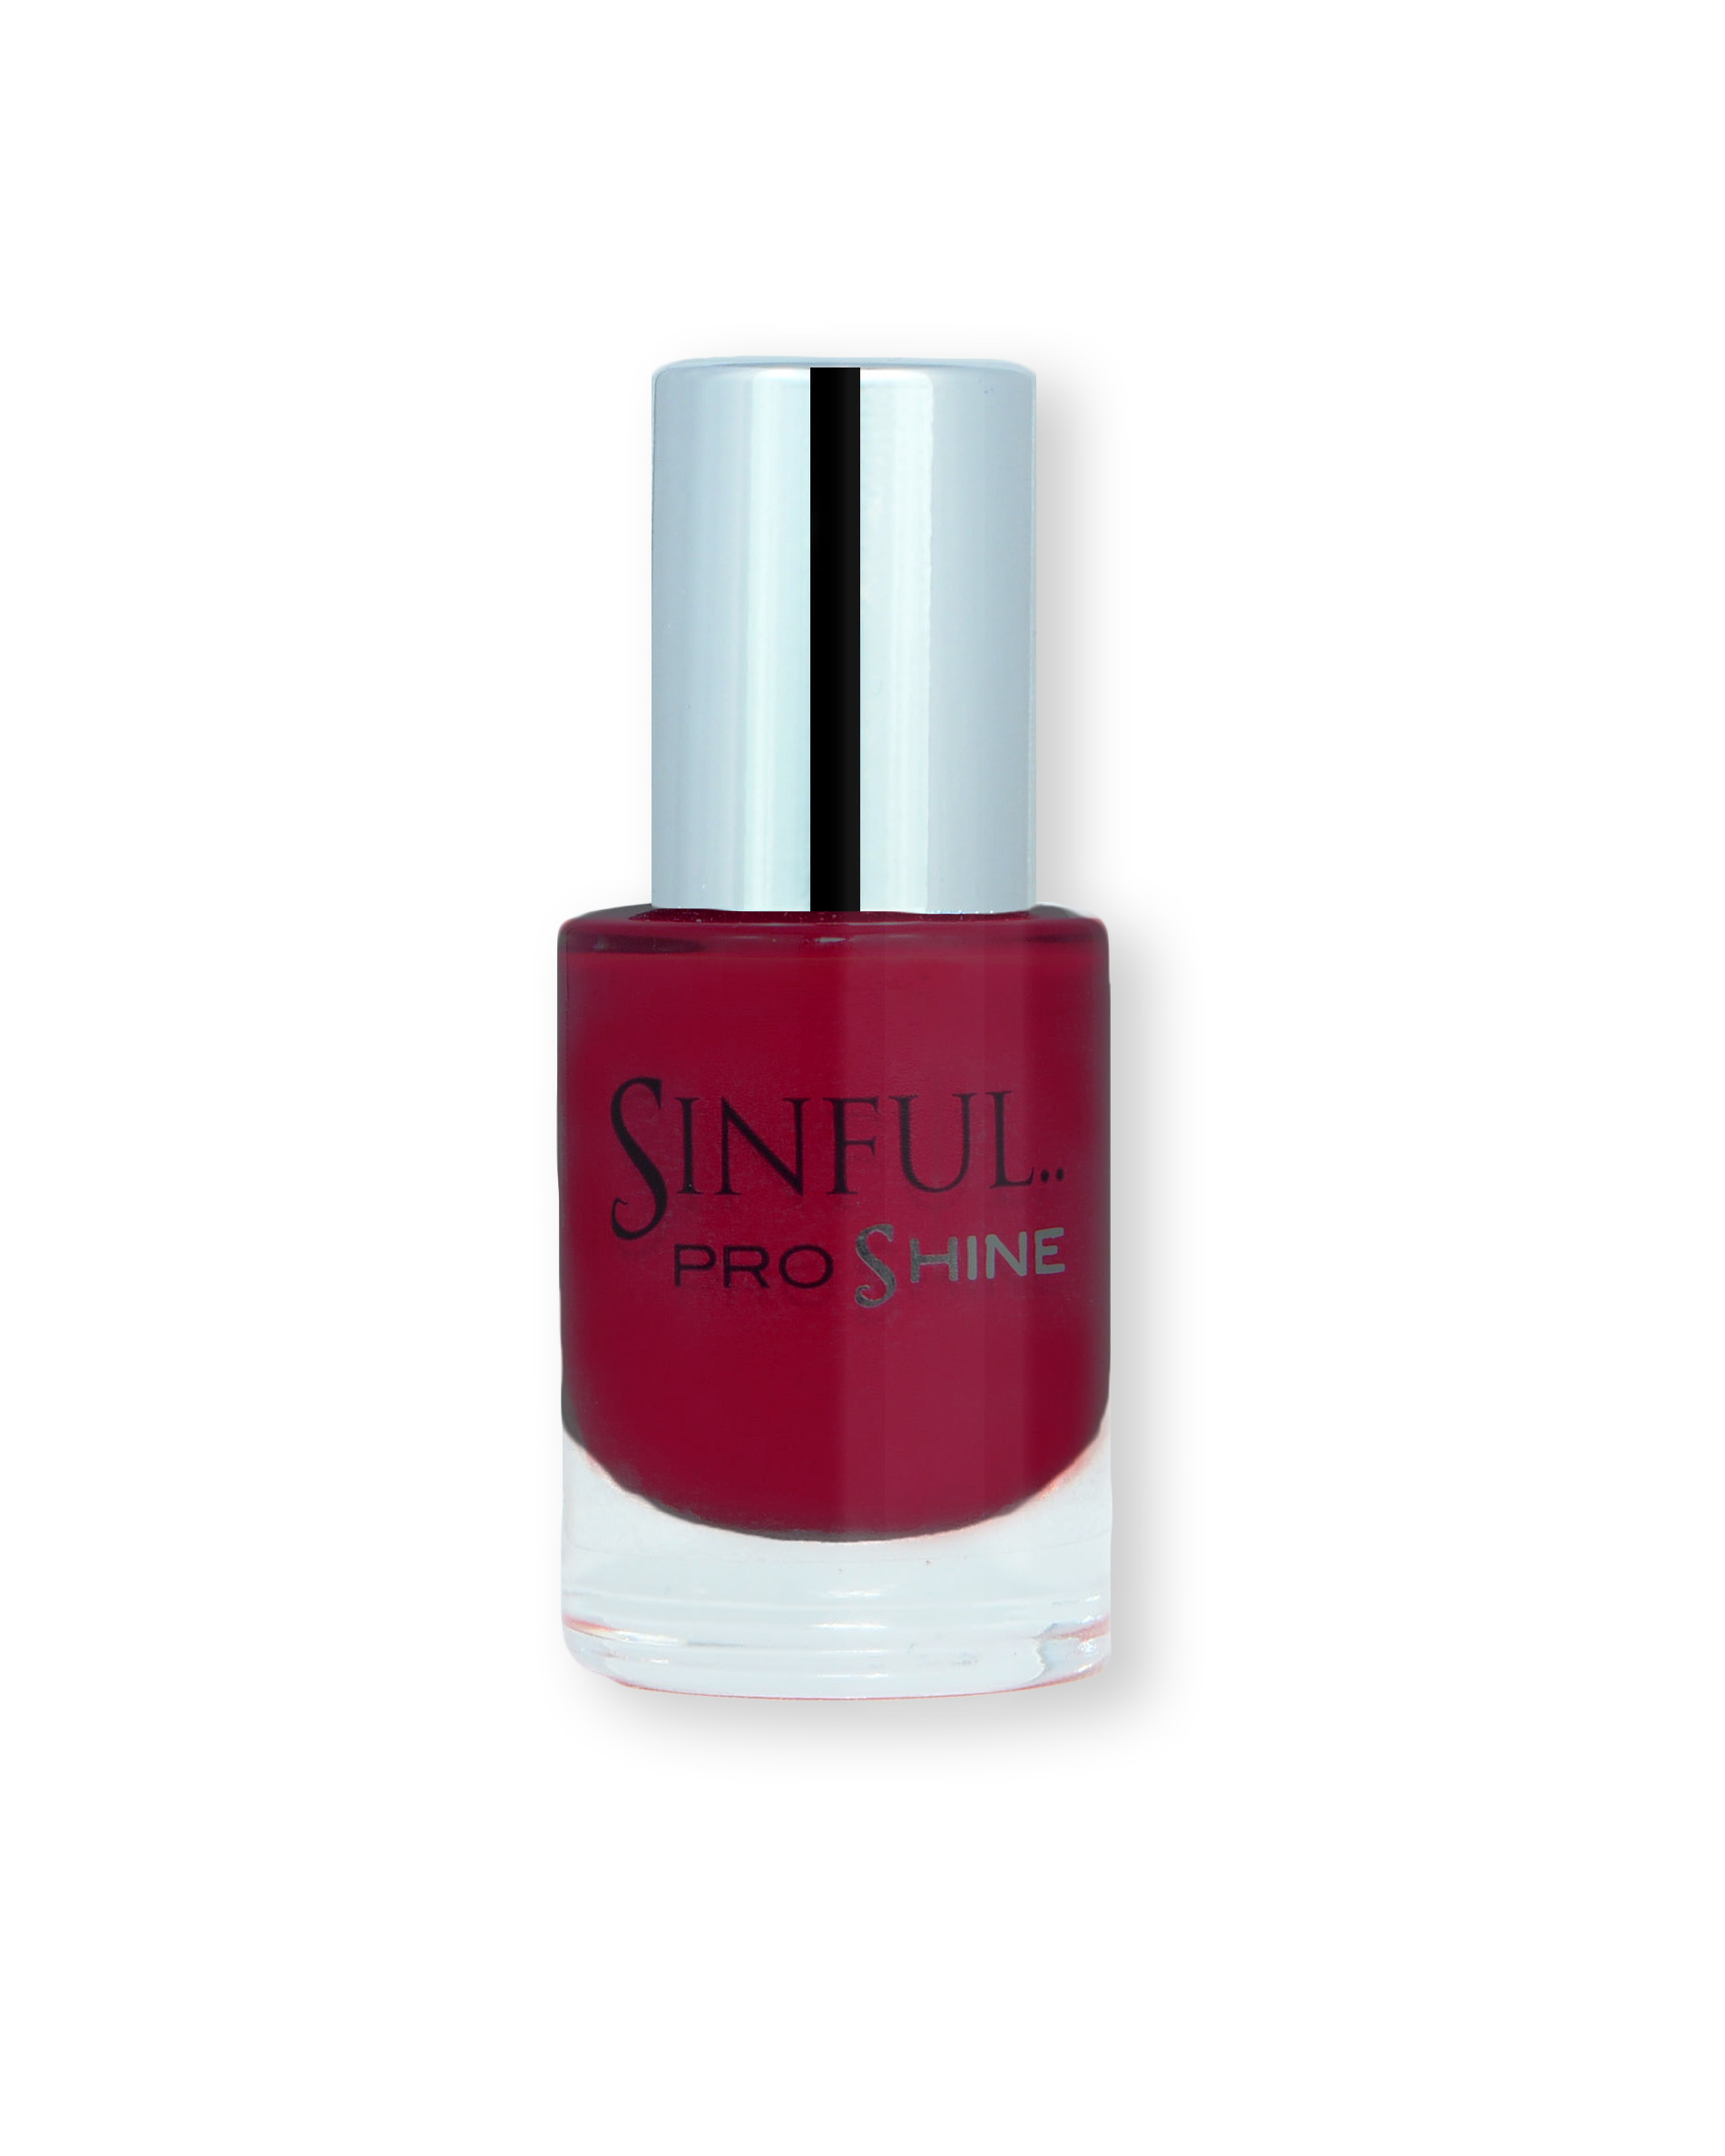 Sinful PROshine is a revolution into top spec imitation gel-like formula, easy application, full coverage and a sleek finish. Spoil yourself with the choice of 42 shades, expertly formulated with the finest grade of pigments. Misbehaving: Oxblood red with a creme finish